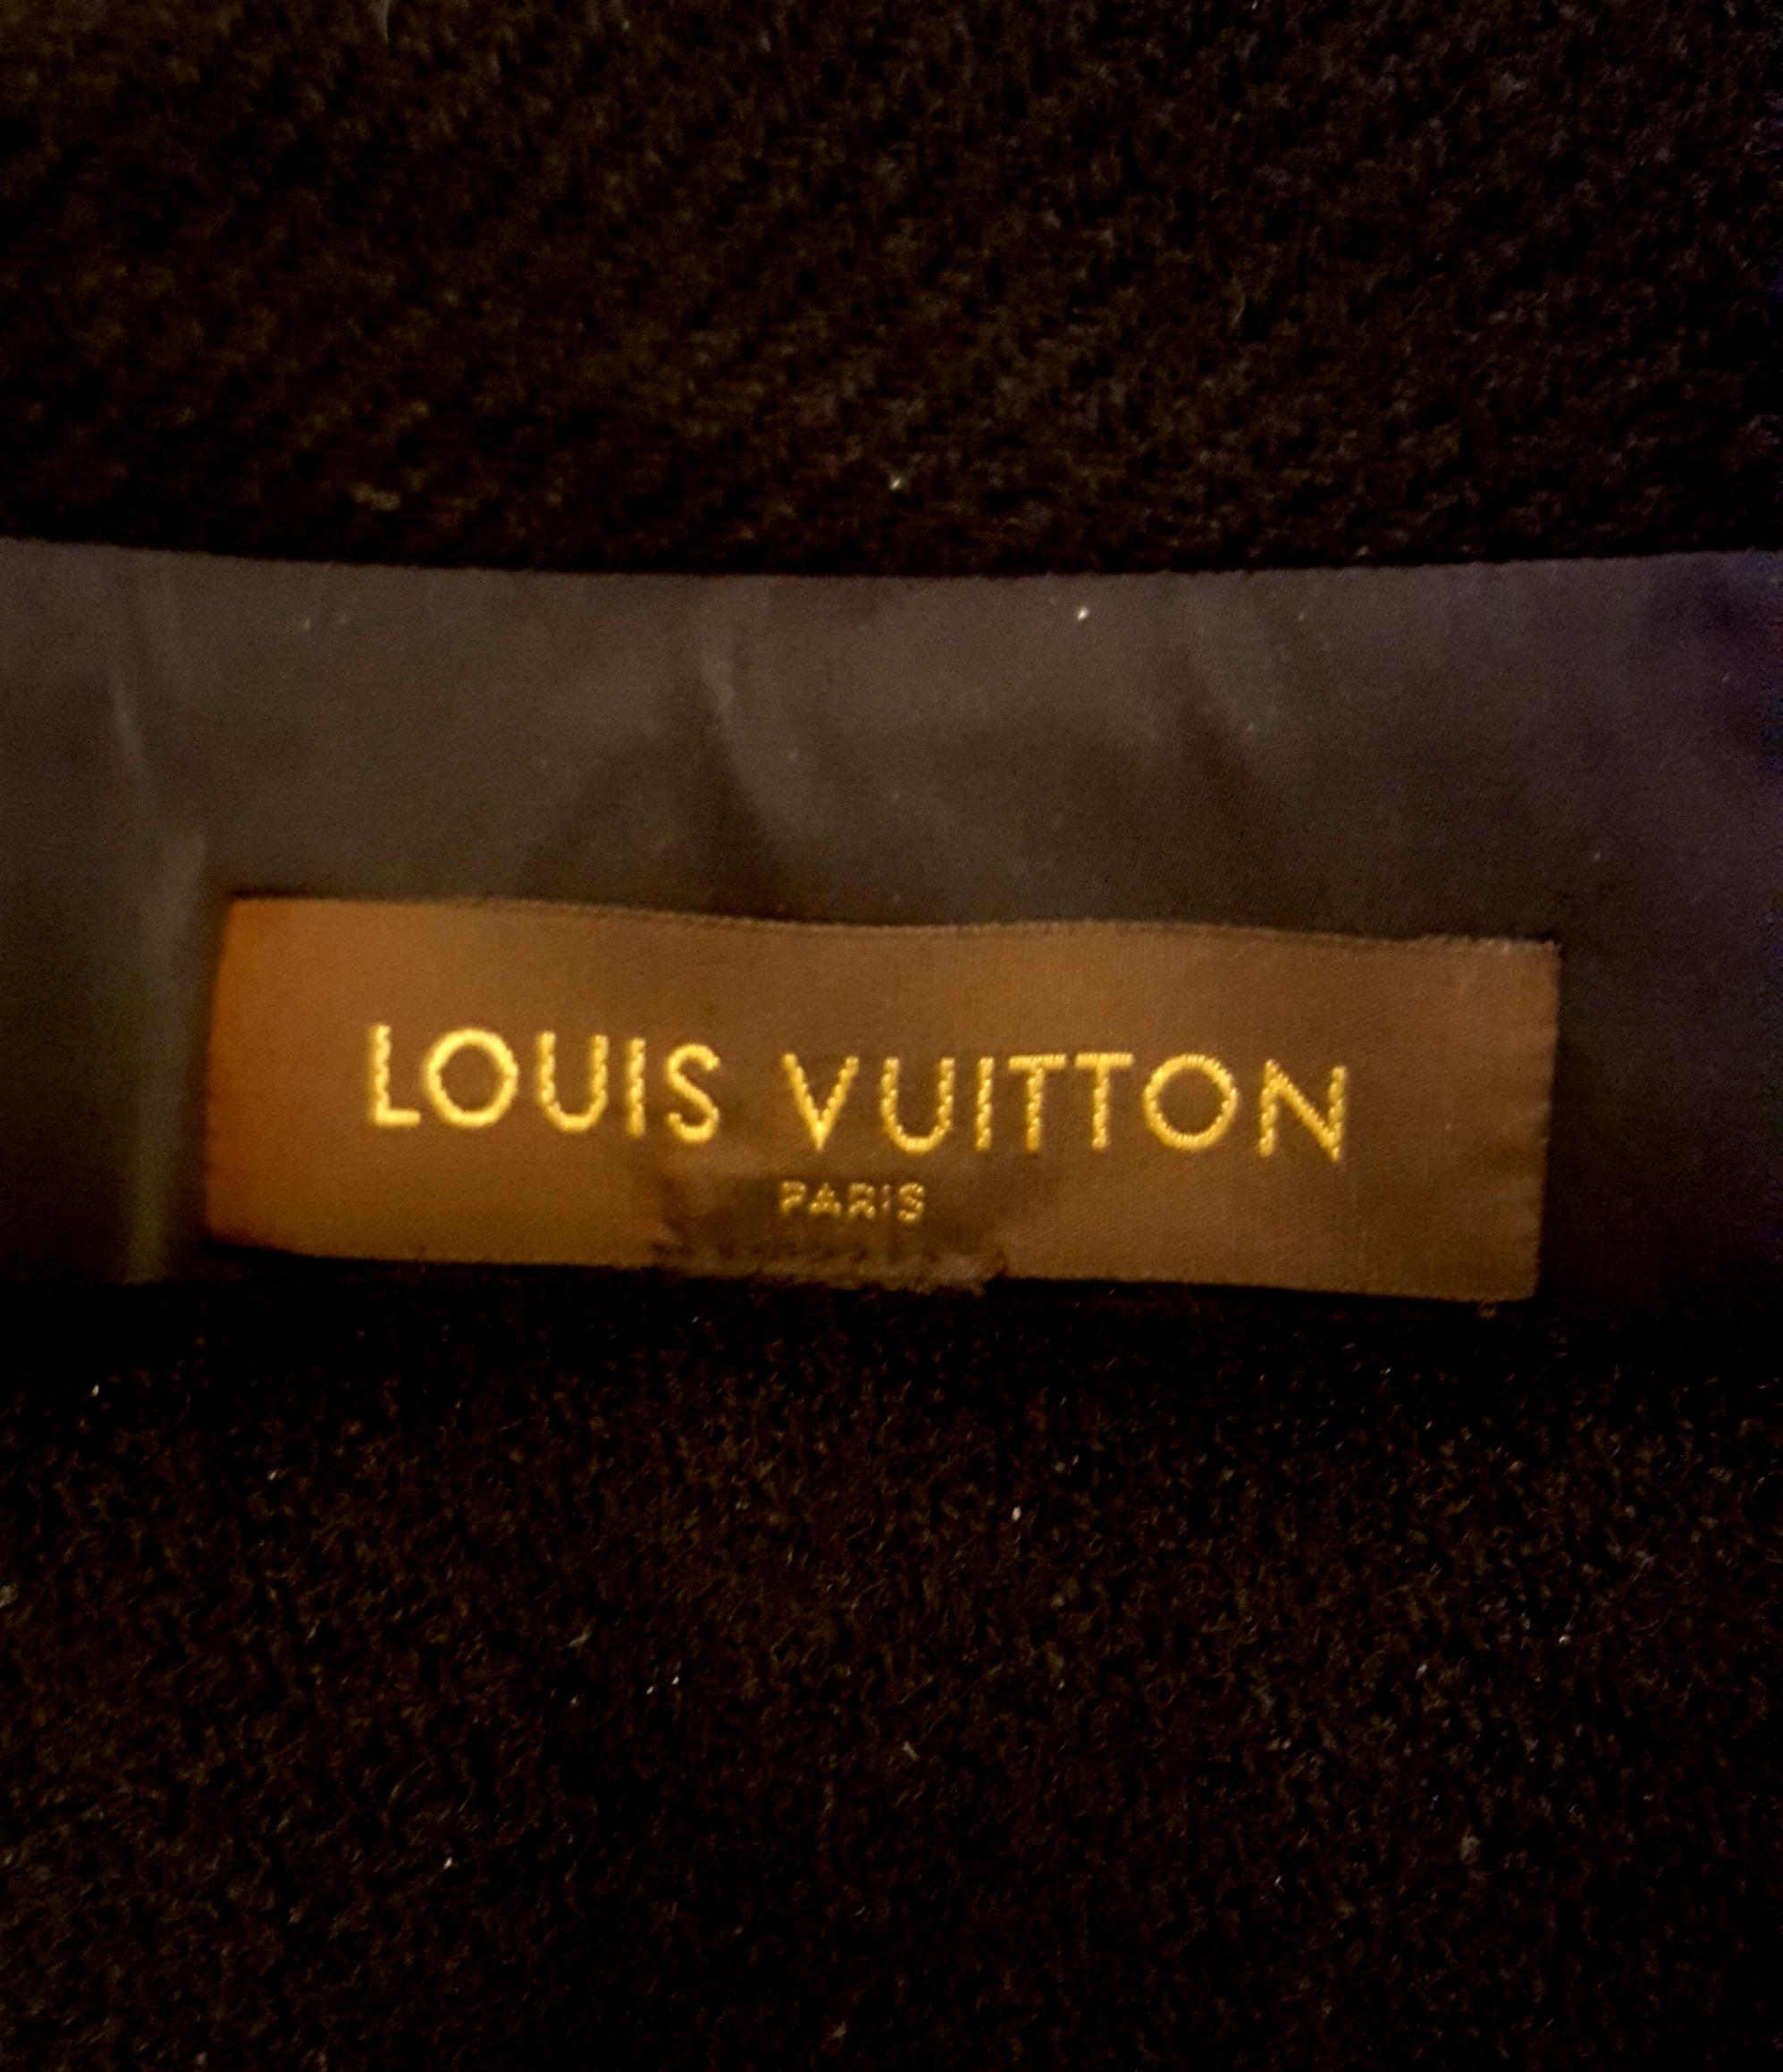 Louis Vuitton Metallic Black, Brown & Pewter Tone Brocade Jacket 42 EU In Excellent Condition For Sale In Palm Beach, FL